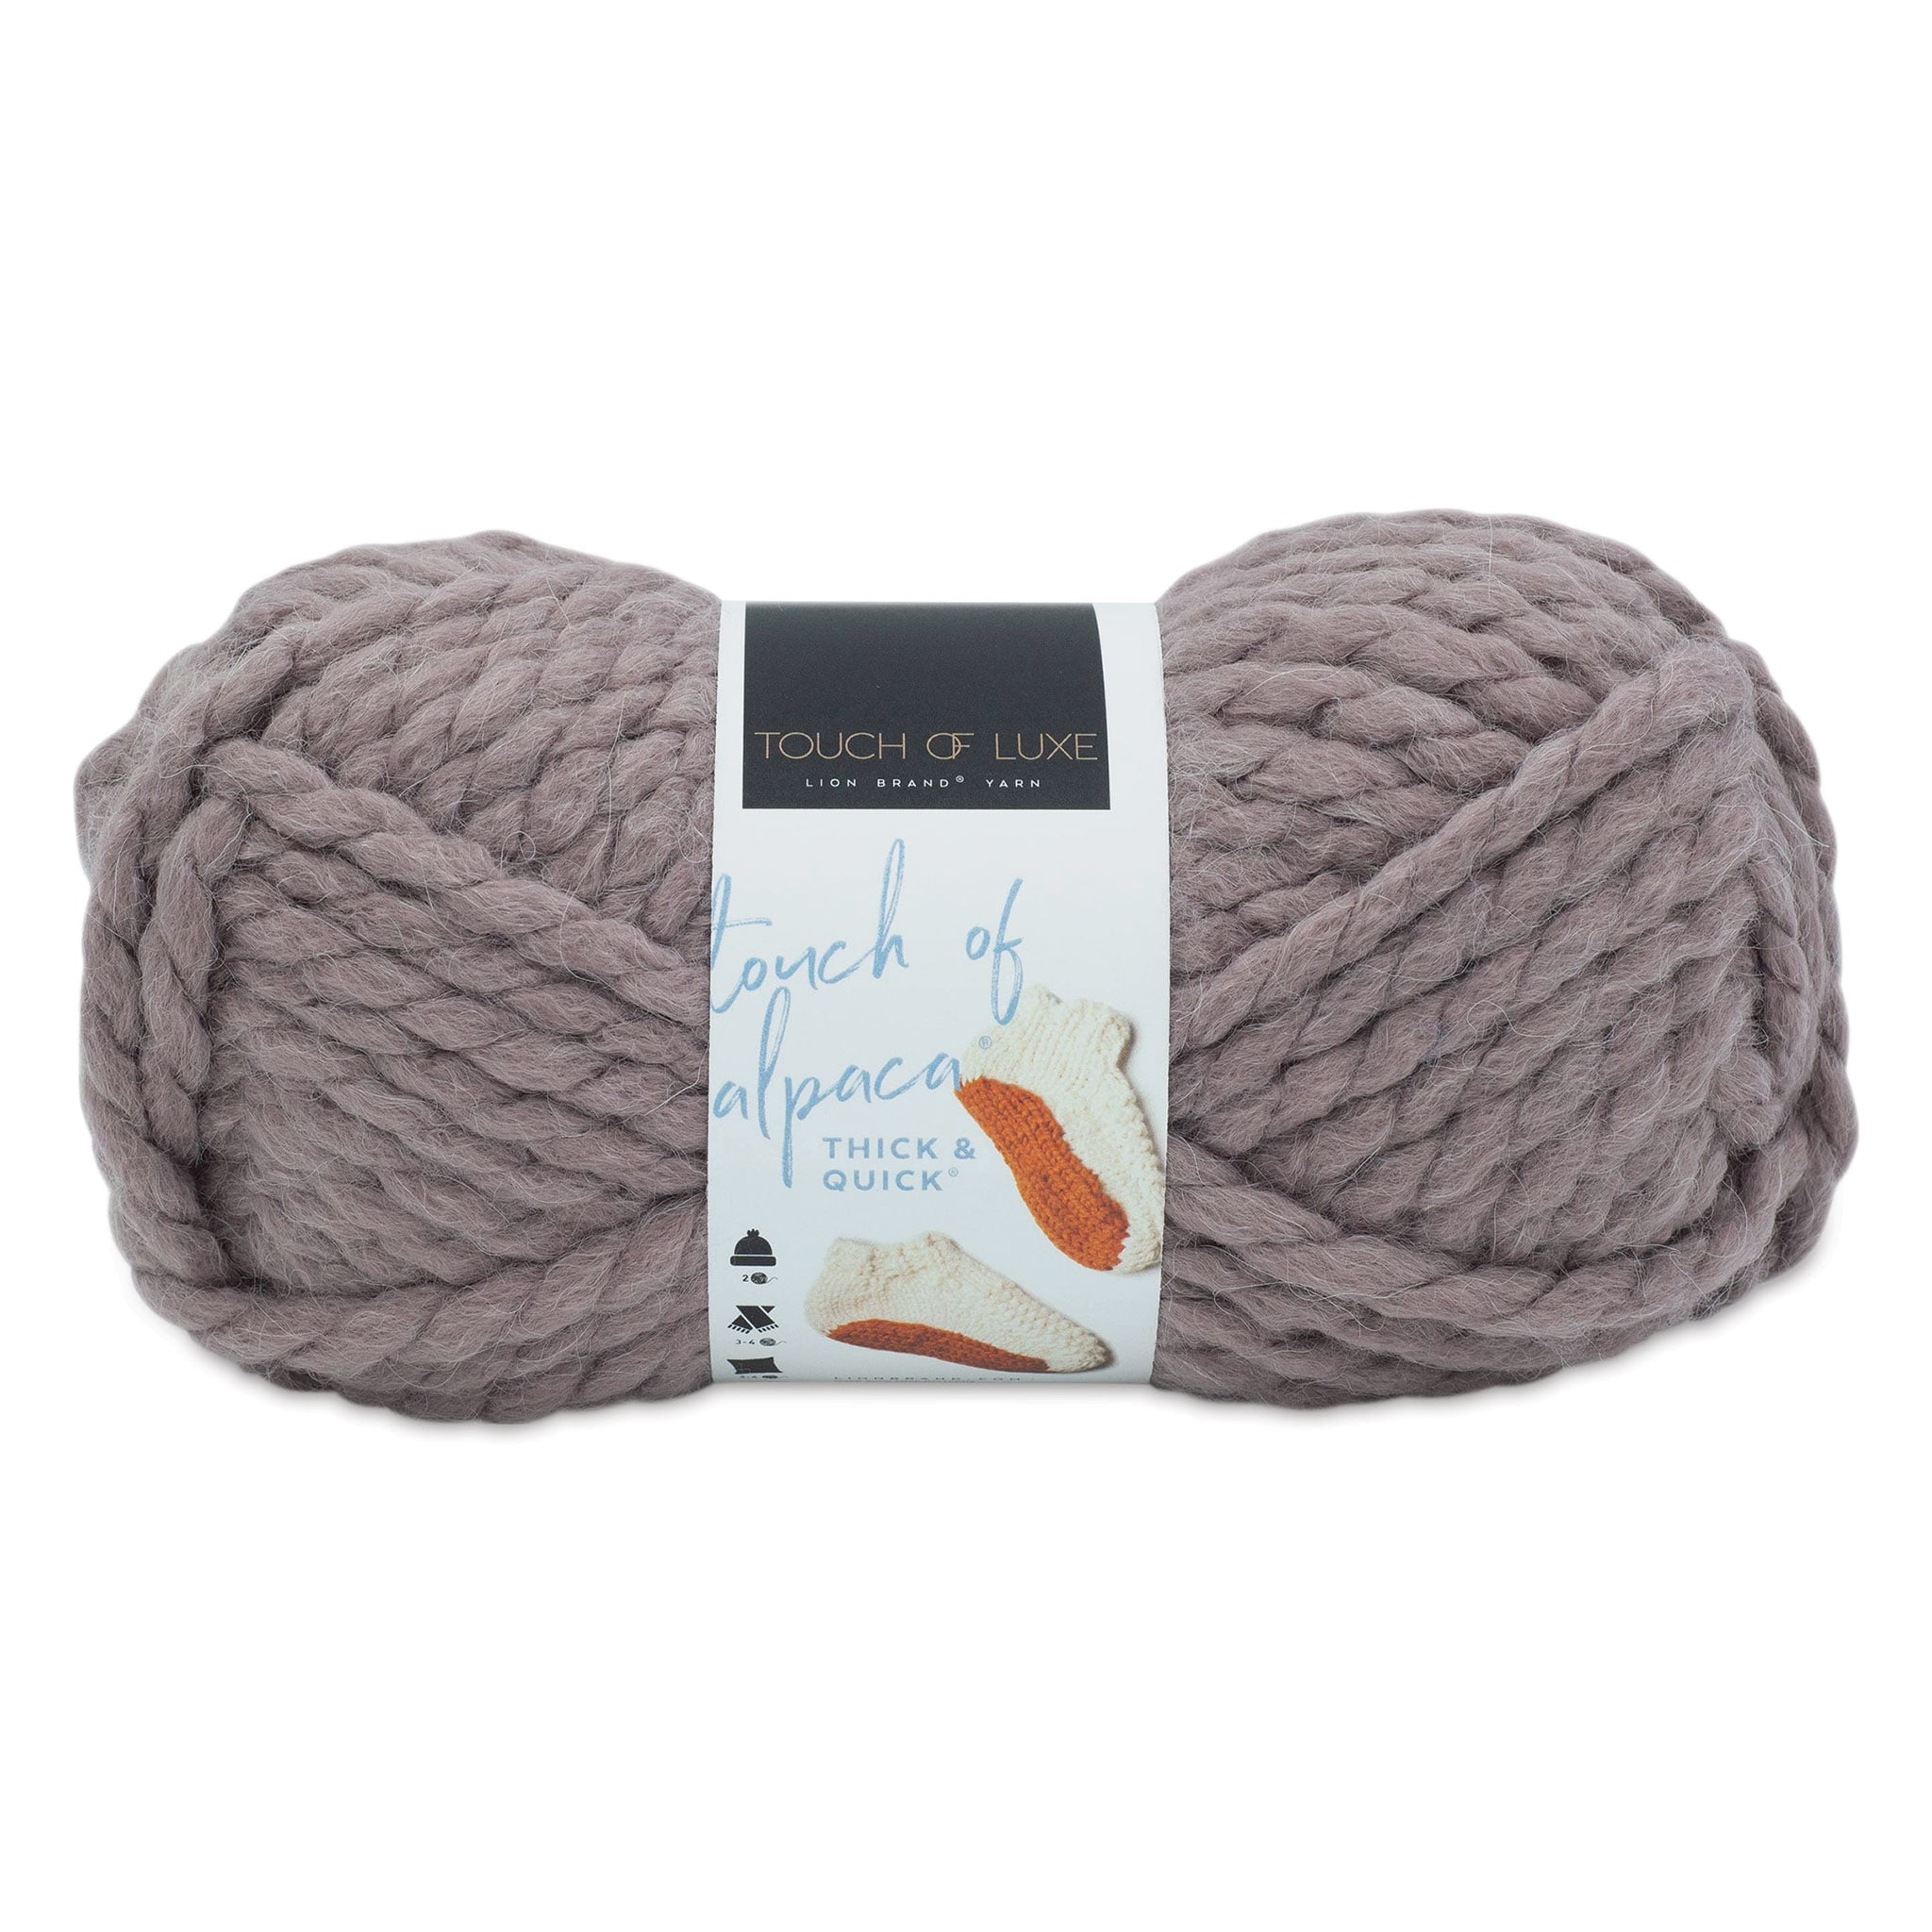 Lion Brand Yarn Touch of Alpaca Thick & Quick Yarn for Knitting,  Crocheting, and Crafting, 1 Pack, Sage